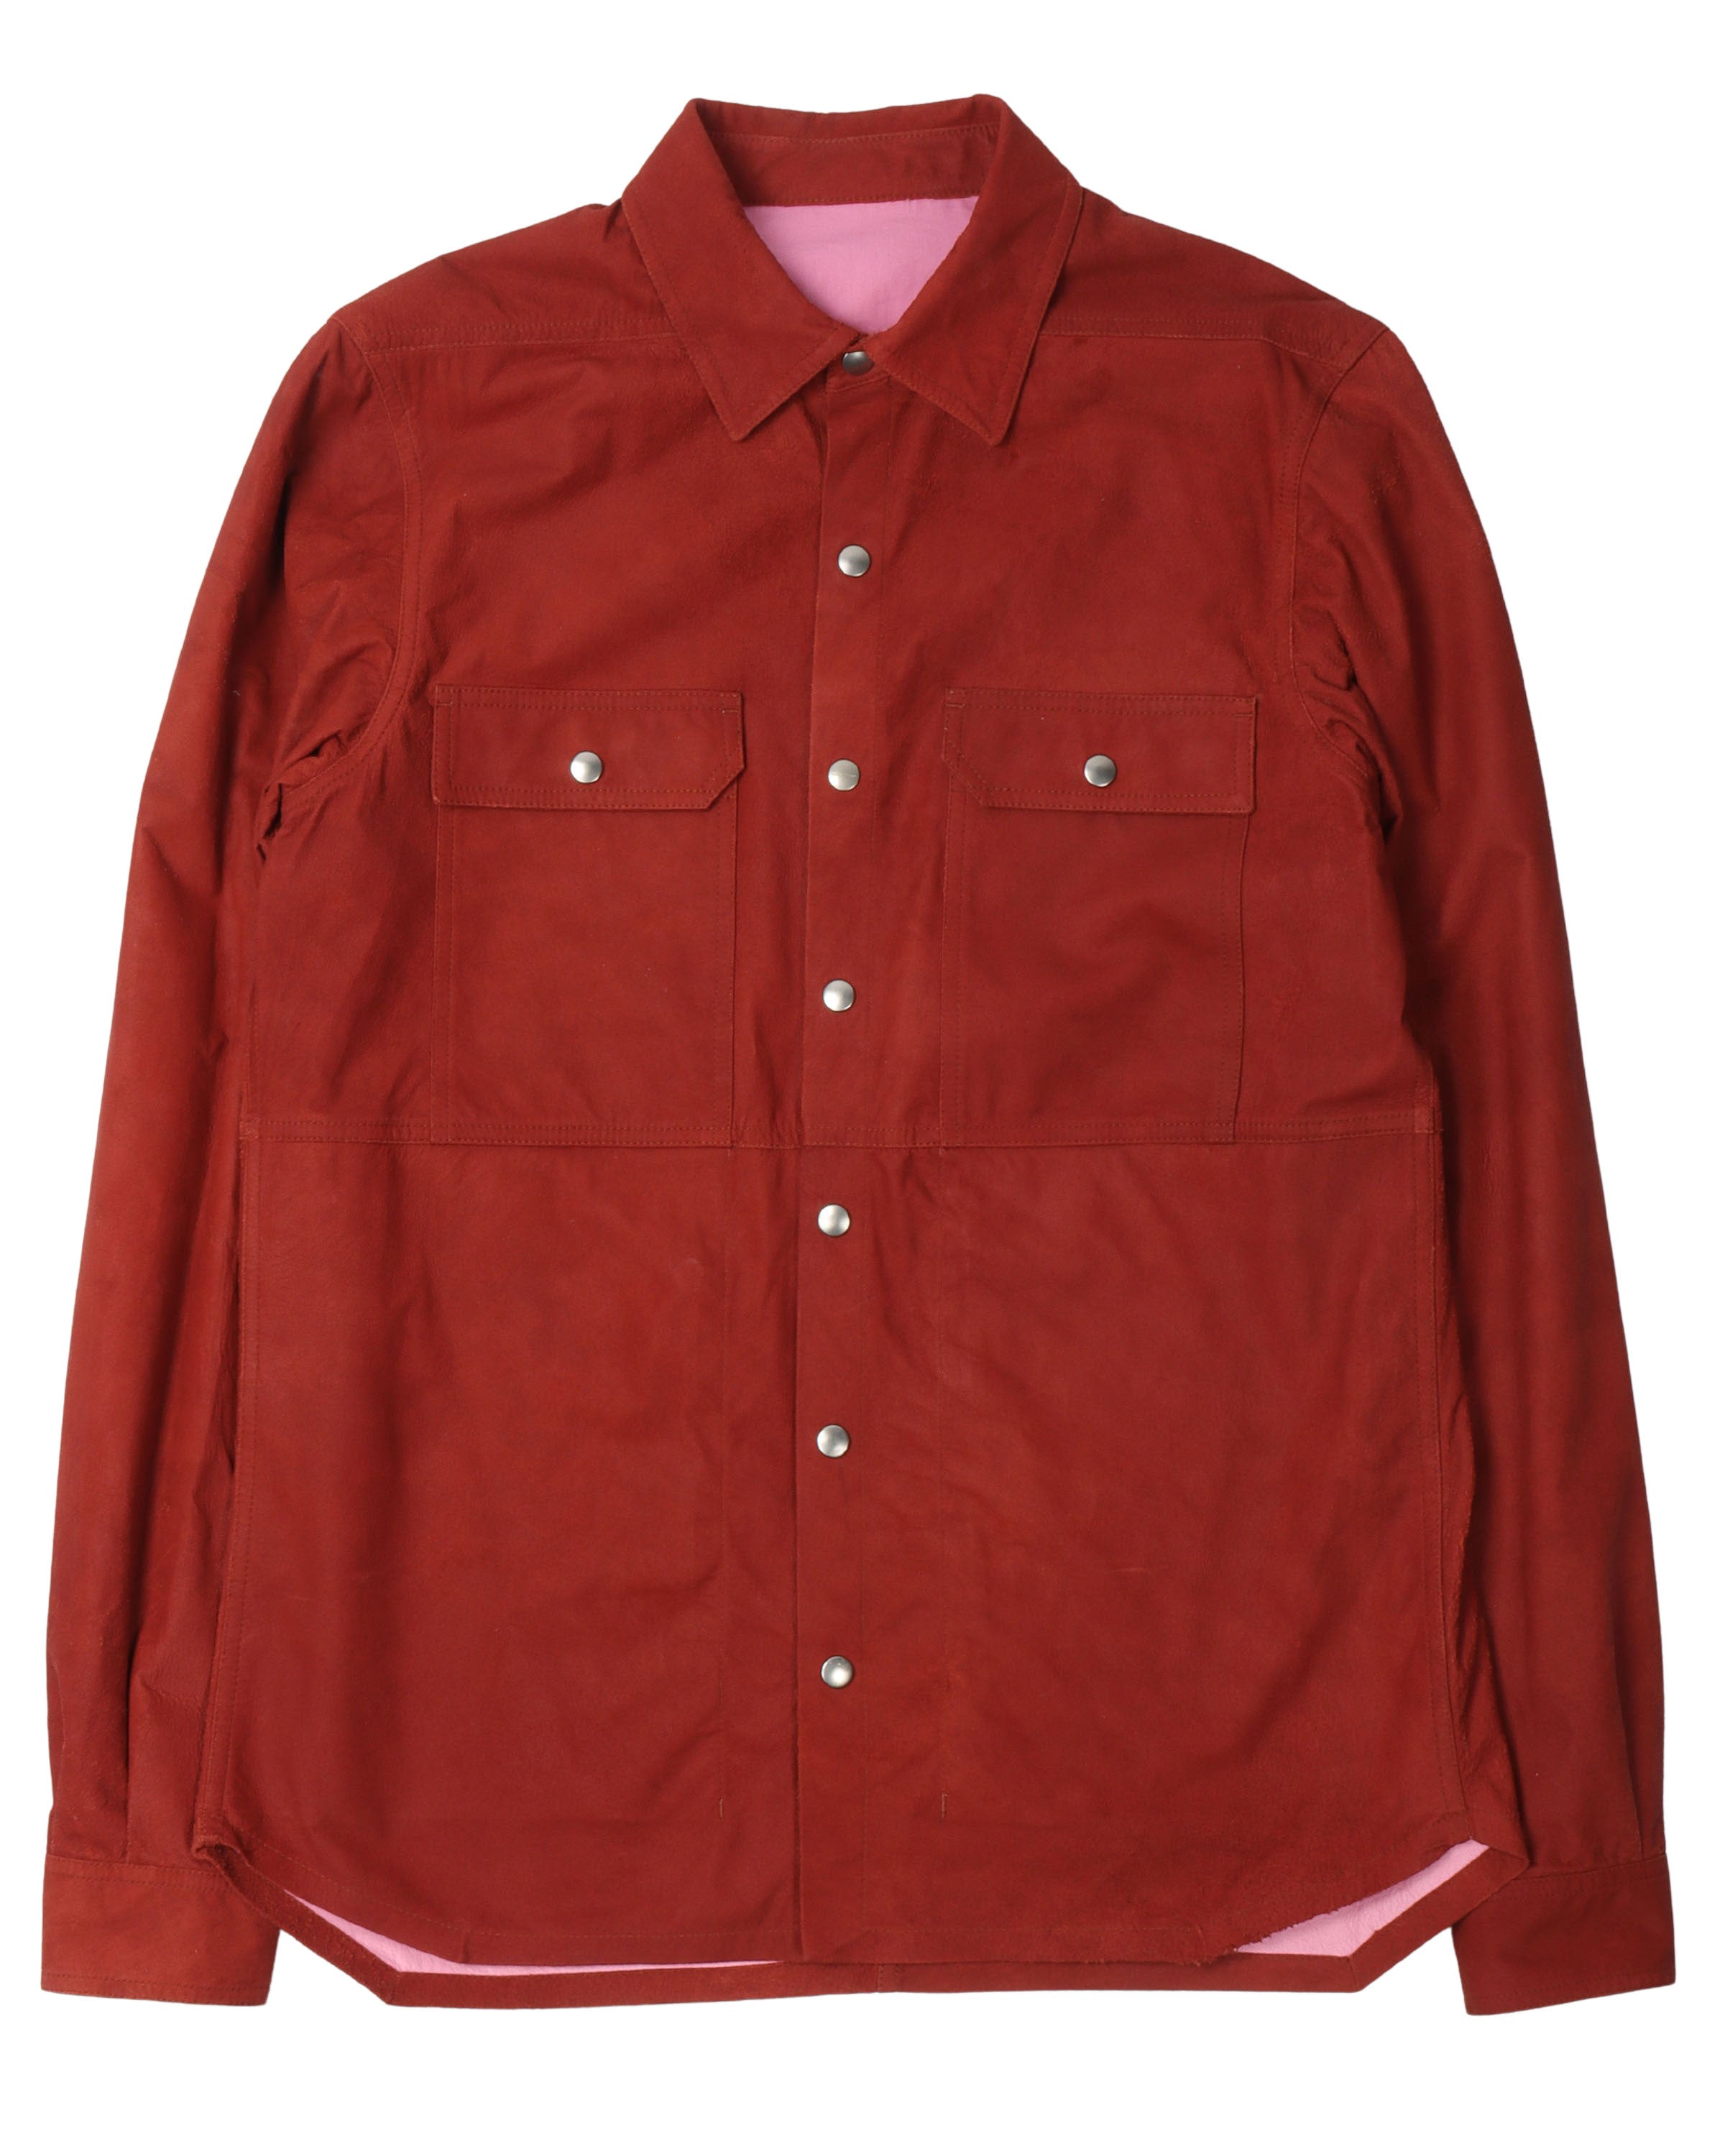 Phlegethon SS21 Suede Button Up Shirt